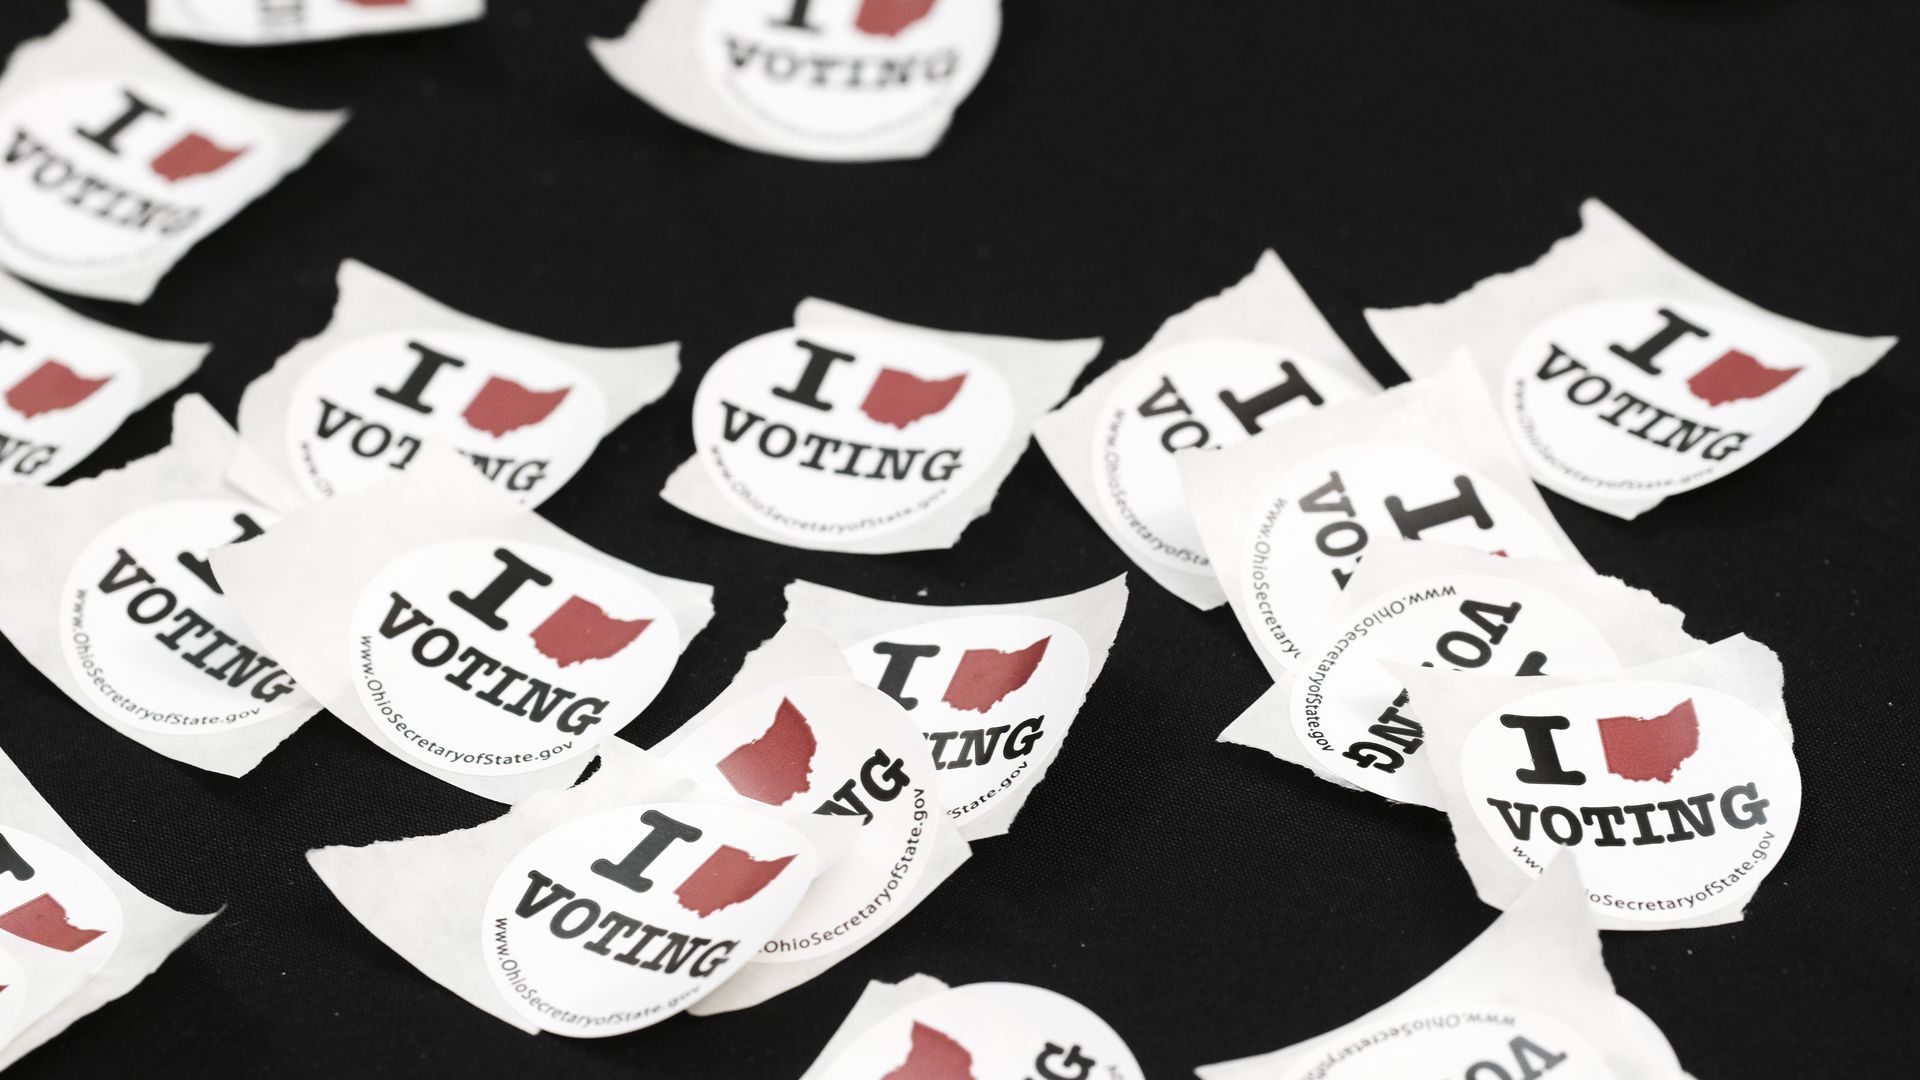 "I Voted" stickers scattered on a table.